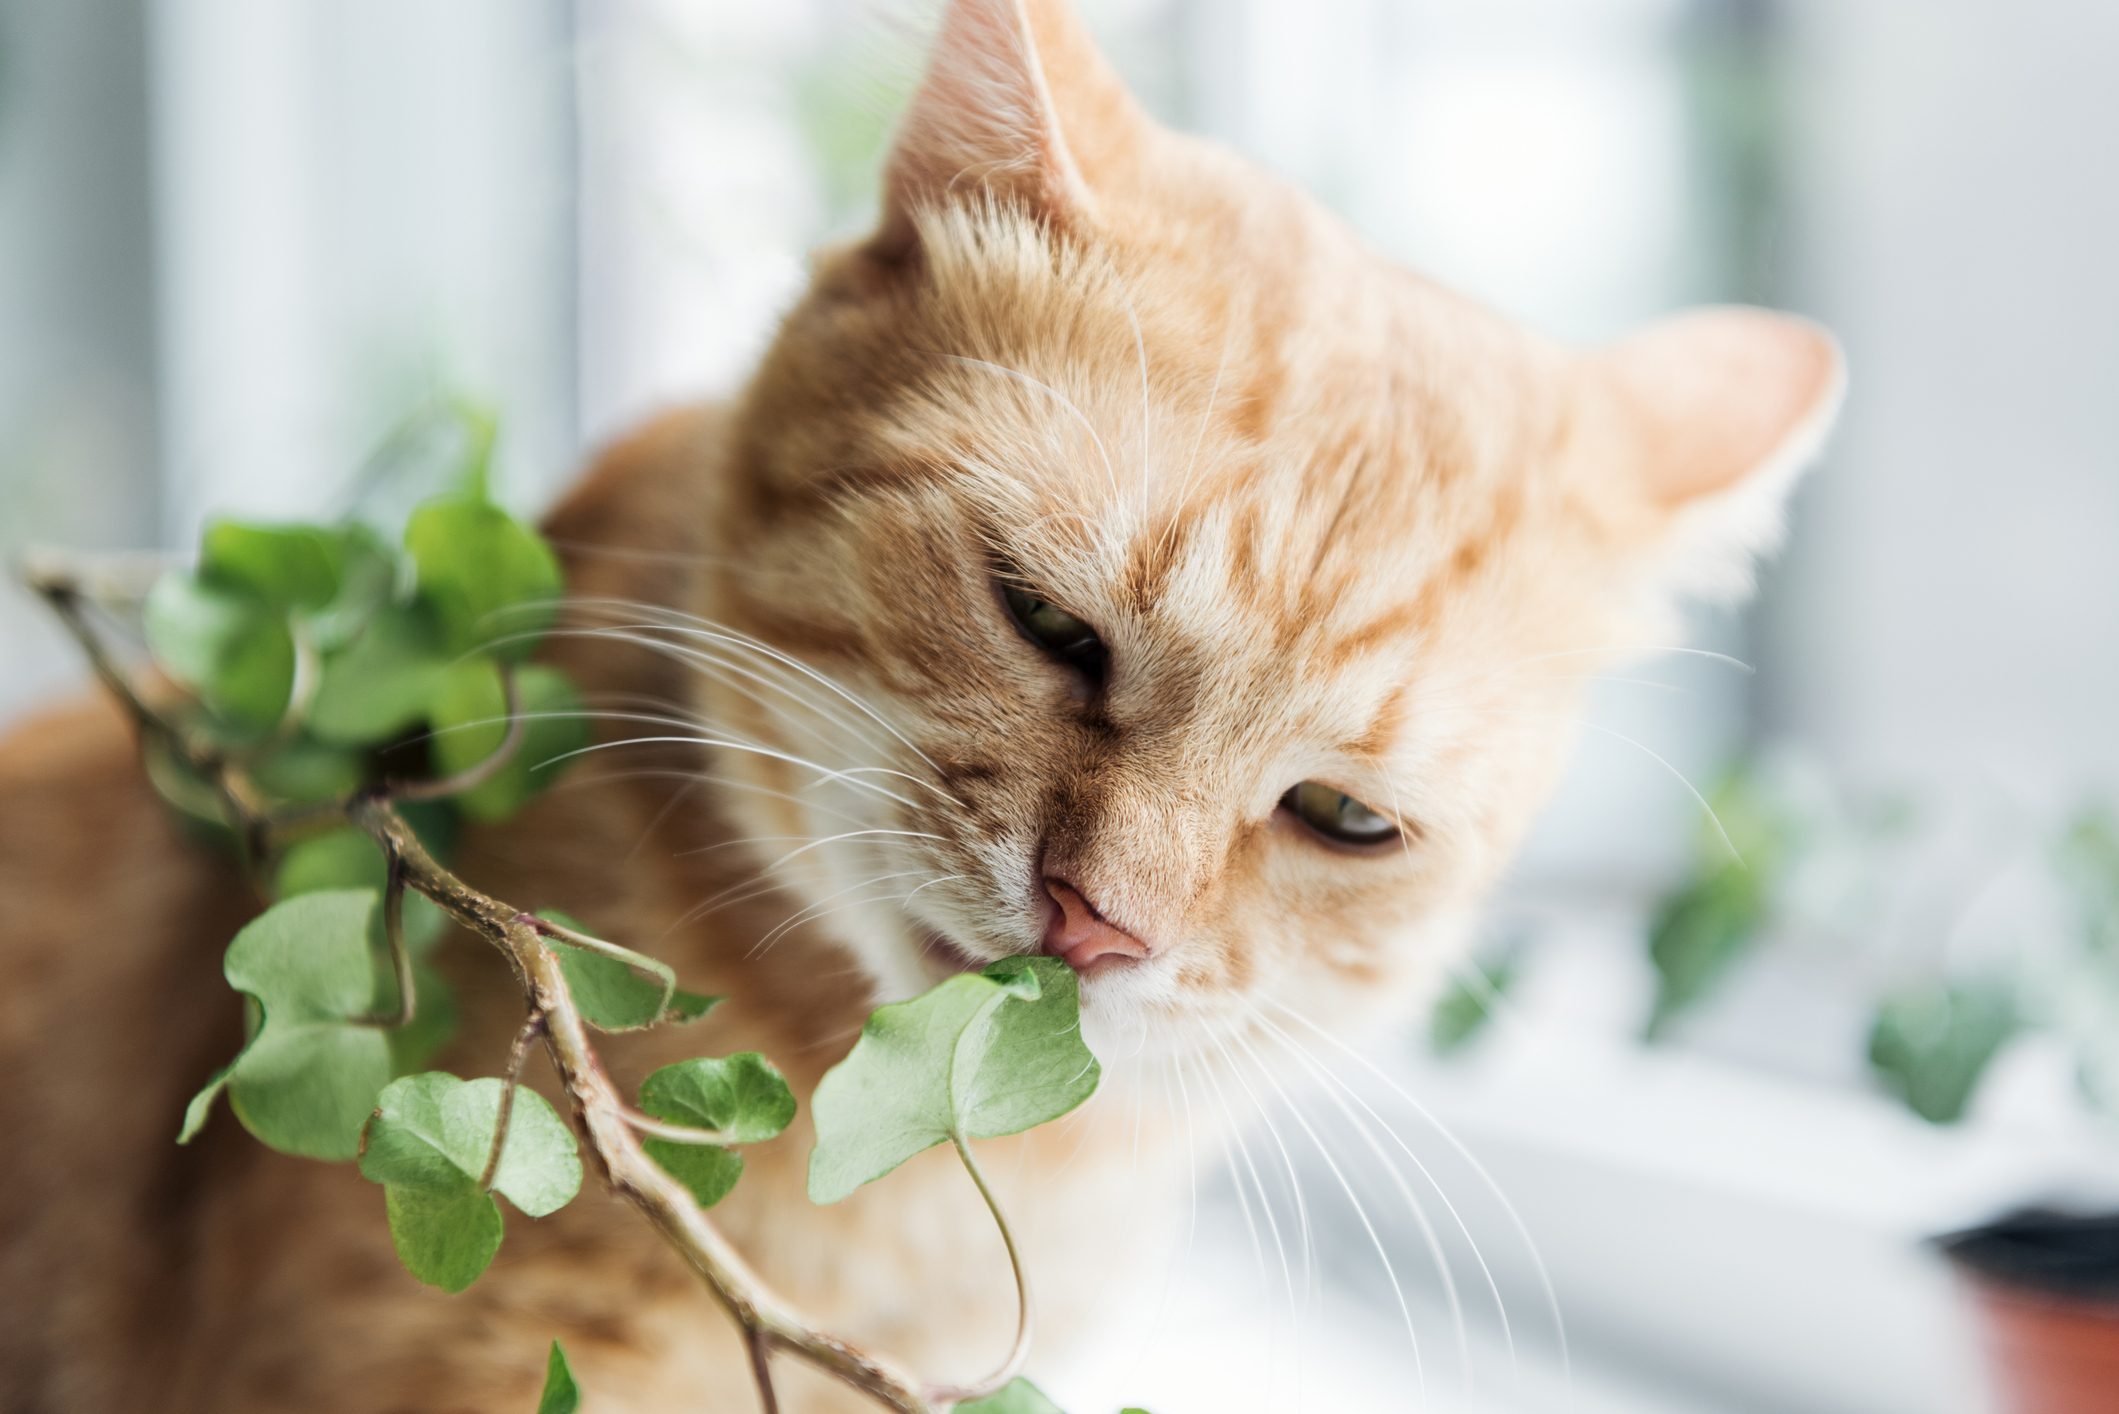 9 Poisonous Plants Every Cat Owner Should Avoid